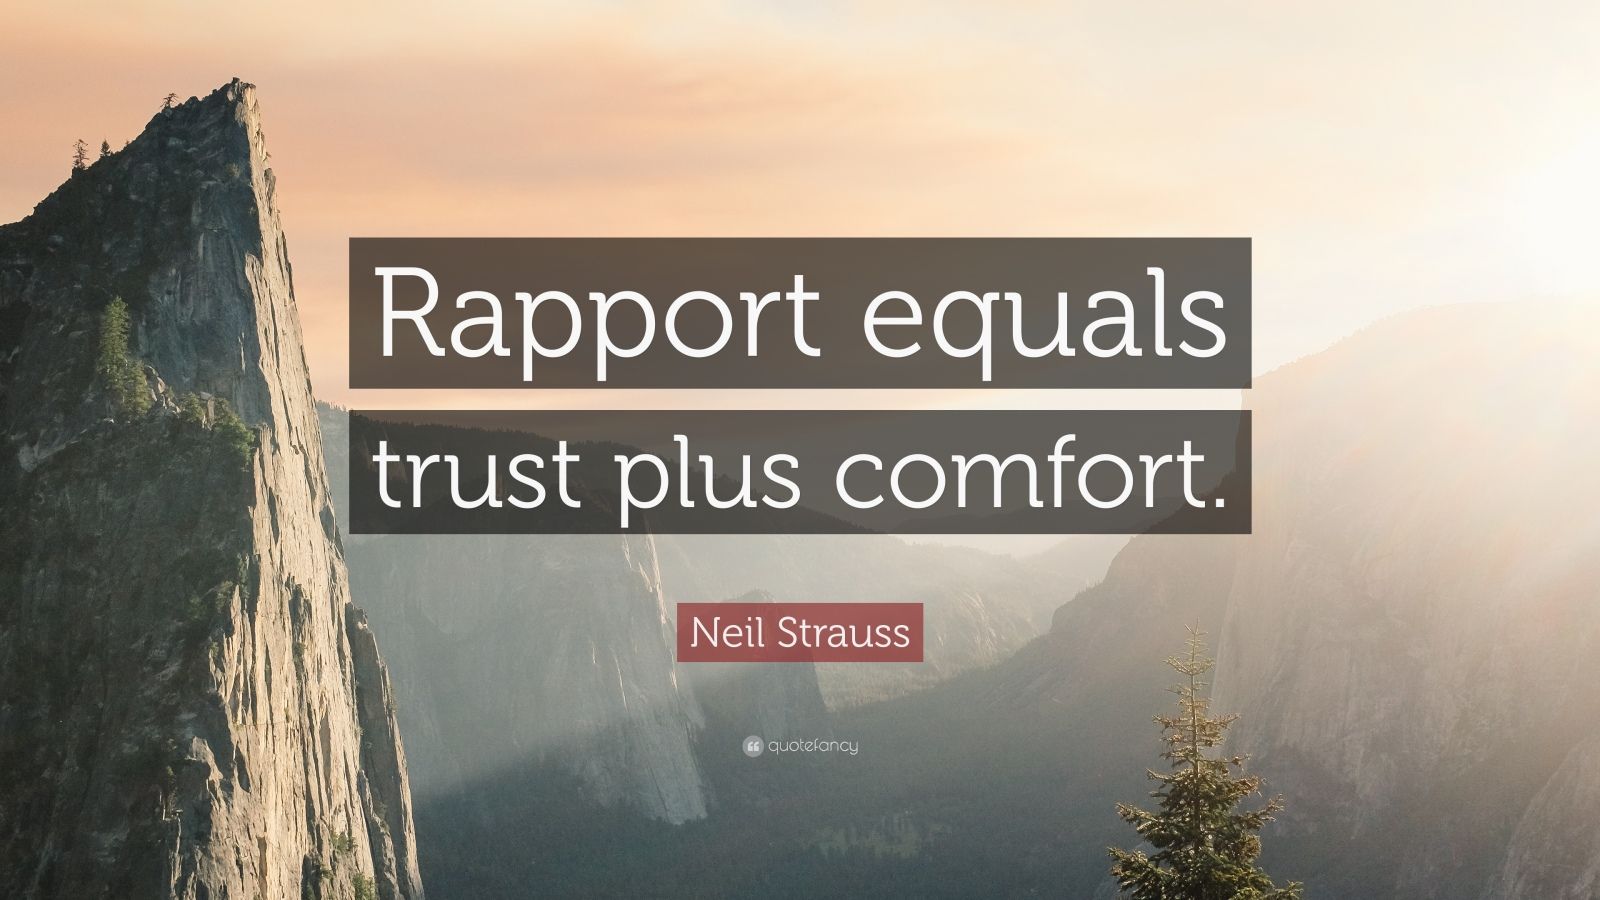 Neil Strauss Quote: “Rapport equals trust plus comfort.”